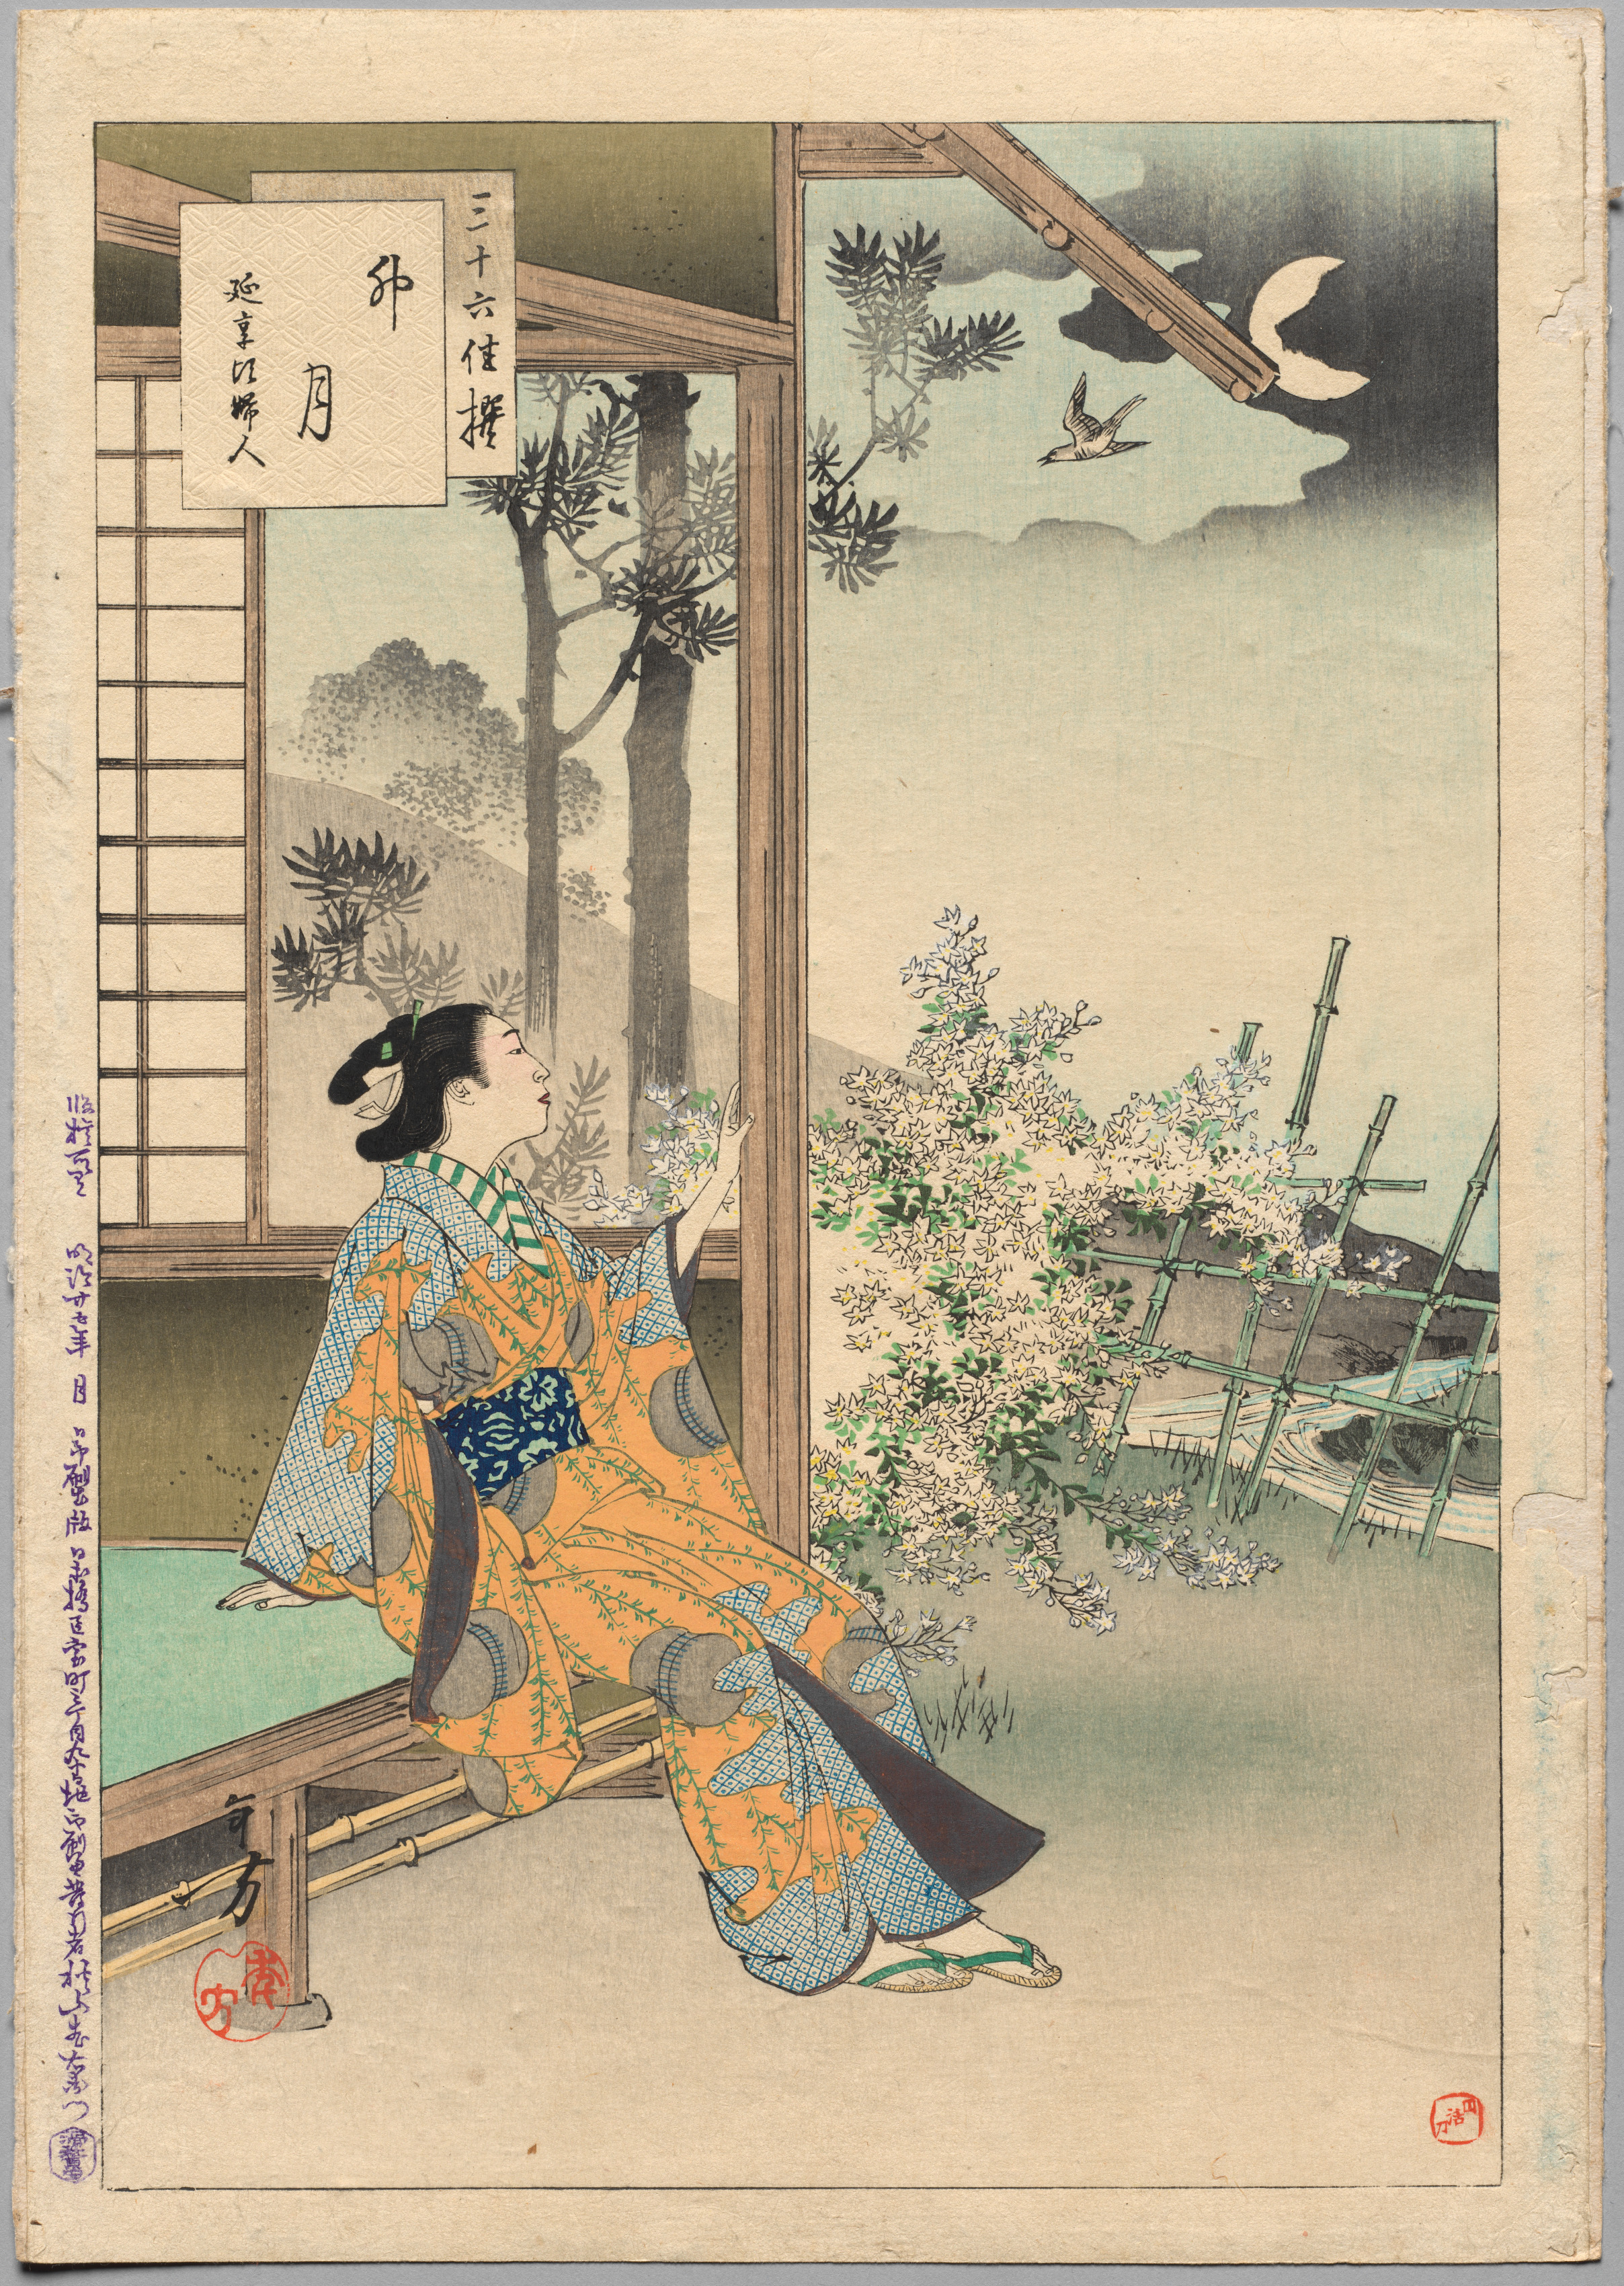 The Fourth Month, A Lady of the Enkyō Era (1744-48), from the series Thirty-six Elegant Selections